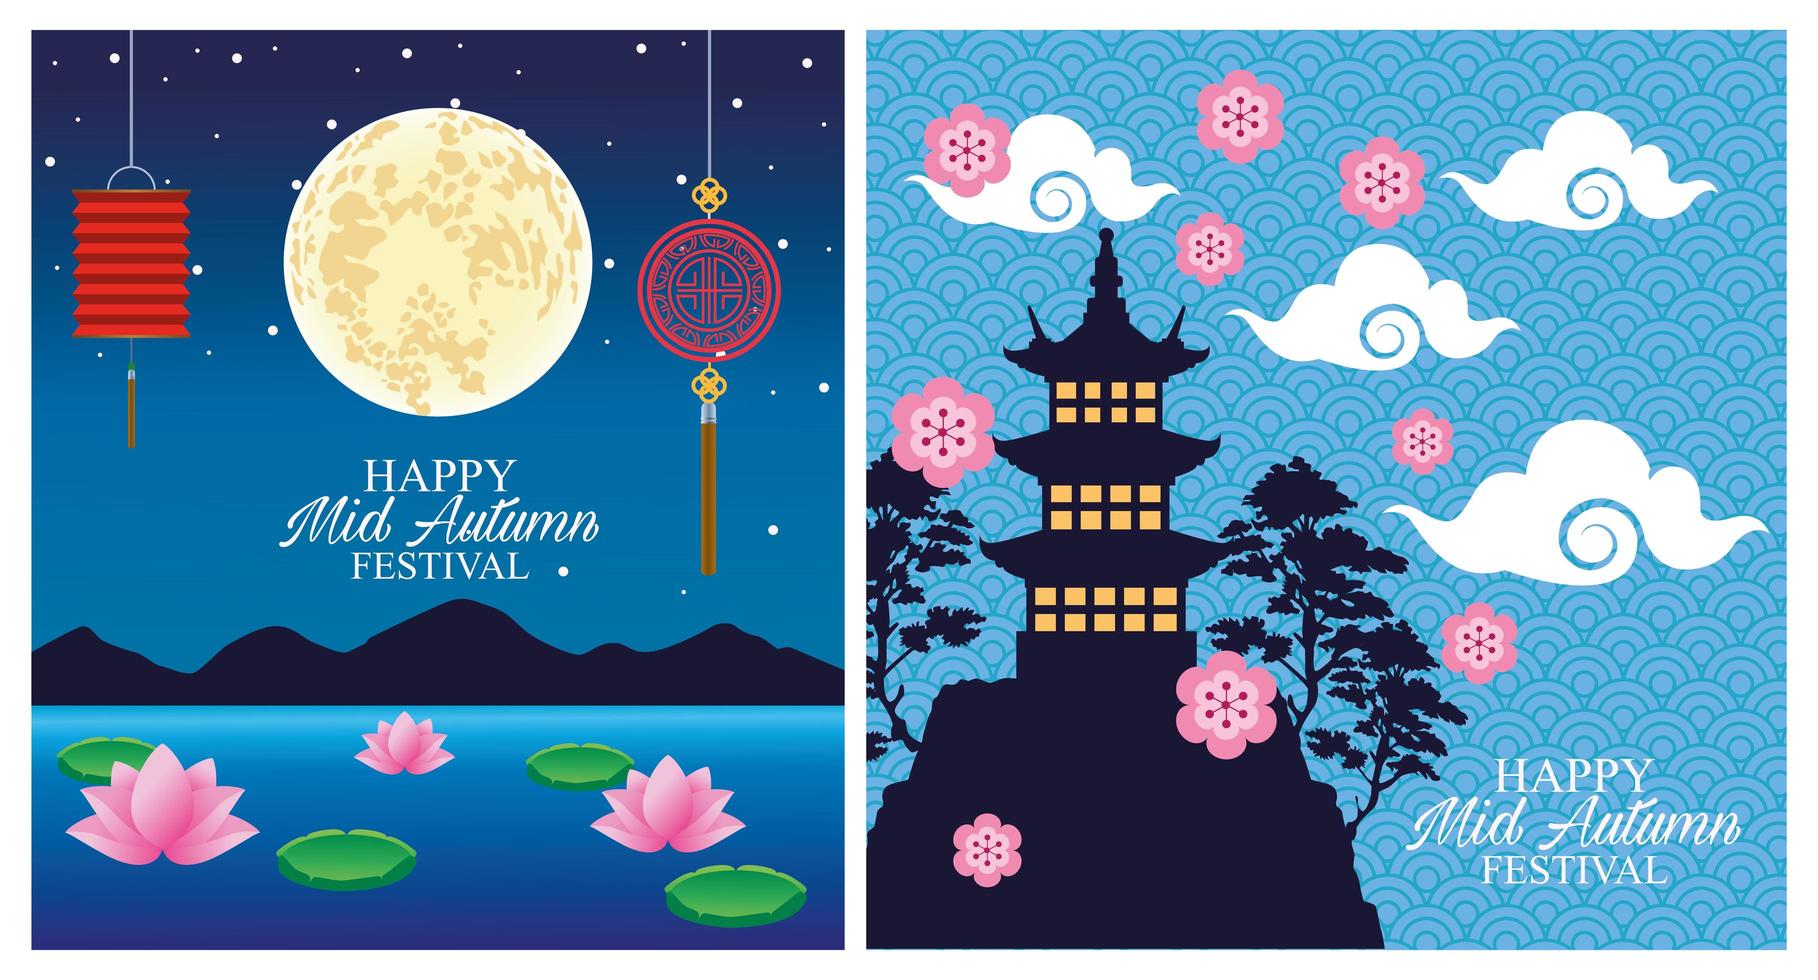 happy mid autumn festival card with lanterns hanging and moon with castle vector